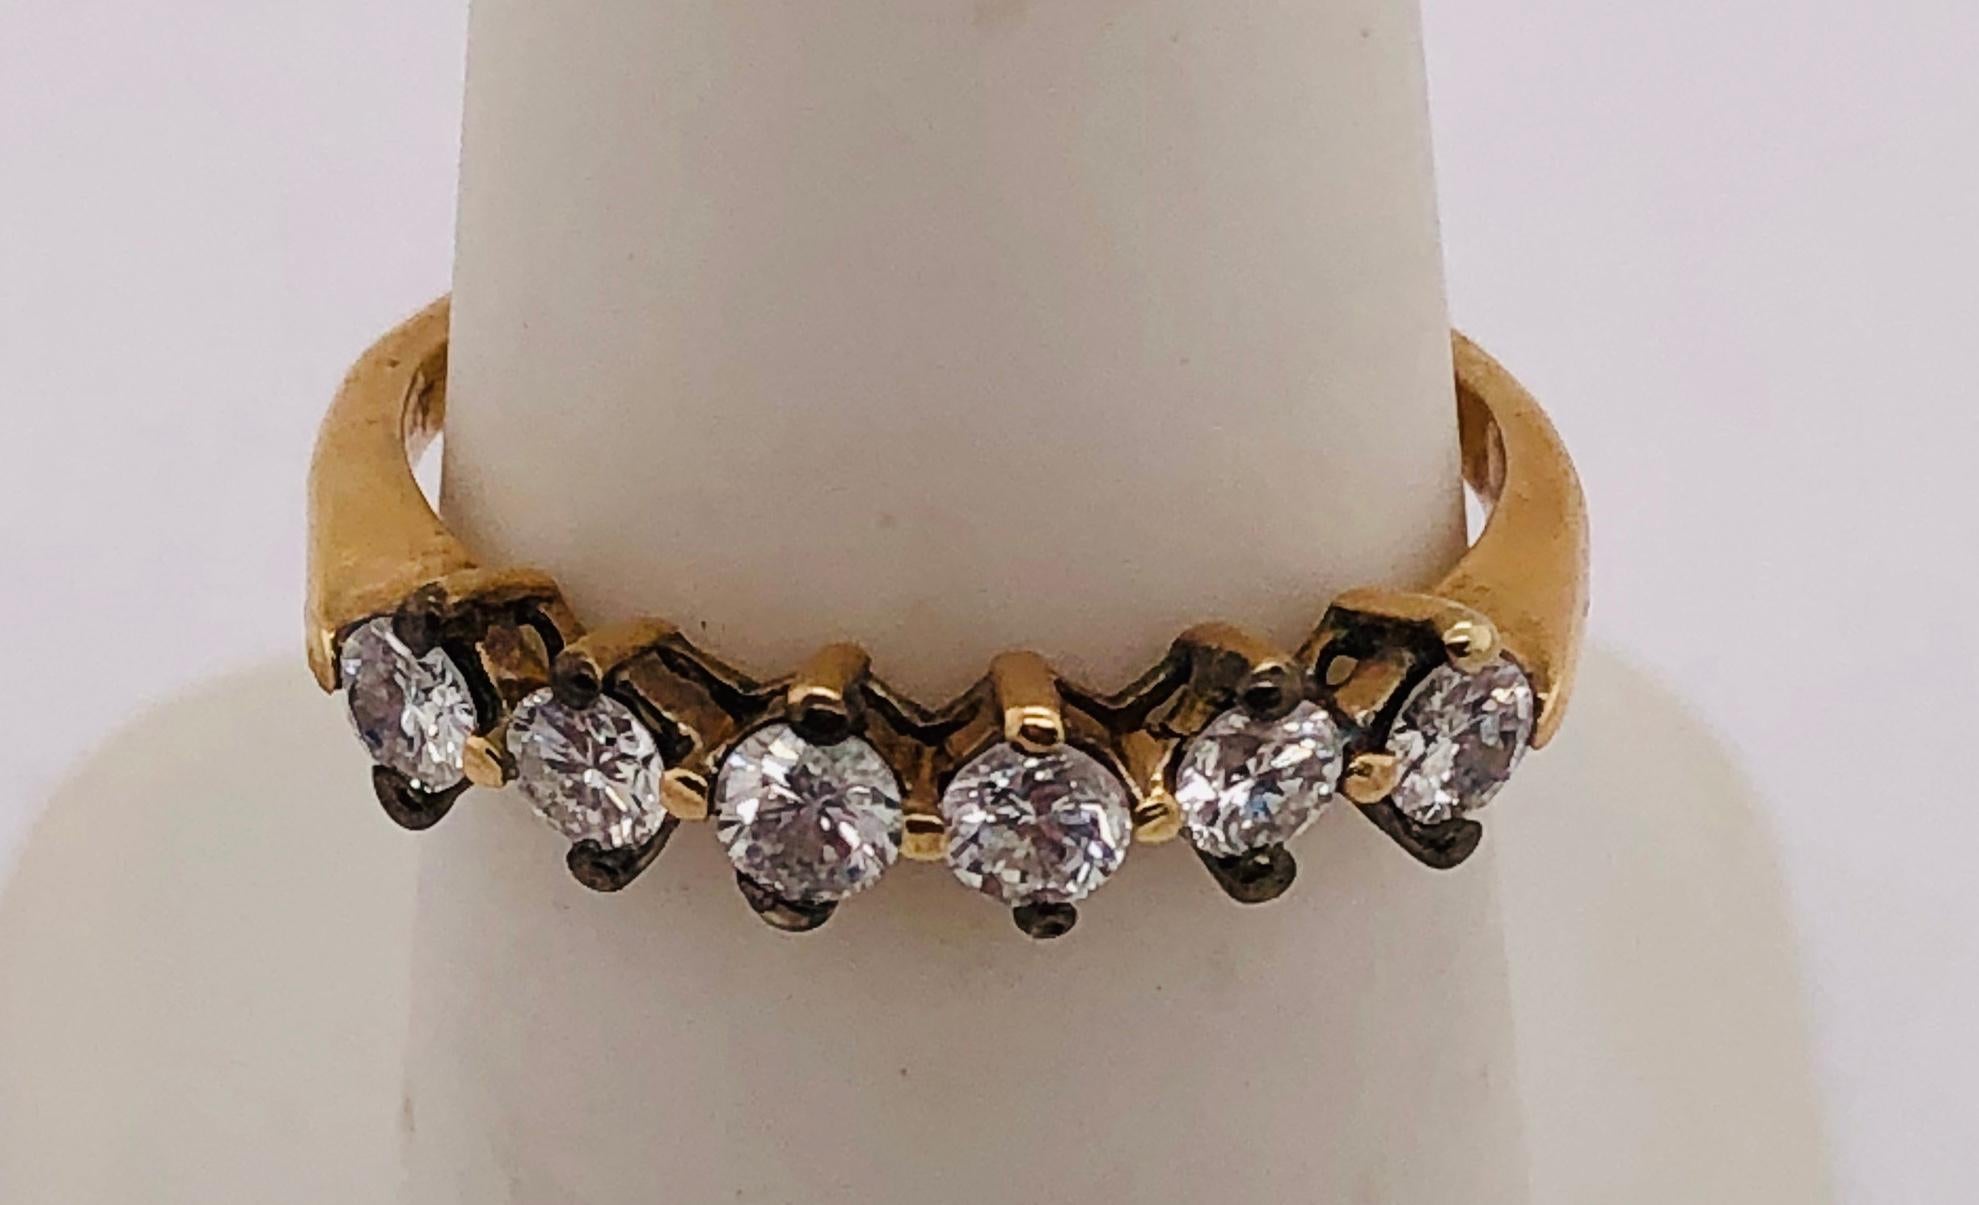 14Kt Yellow Gold Ring with Diamond 0.60 Total Diamond Weight
Size 6.25 grams total weight 
2.11 grams total weight